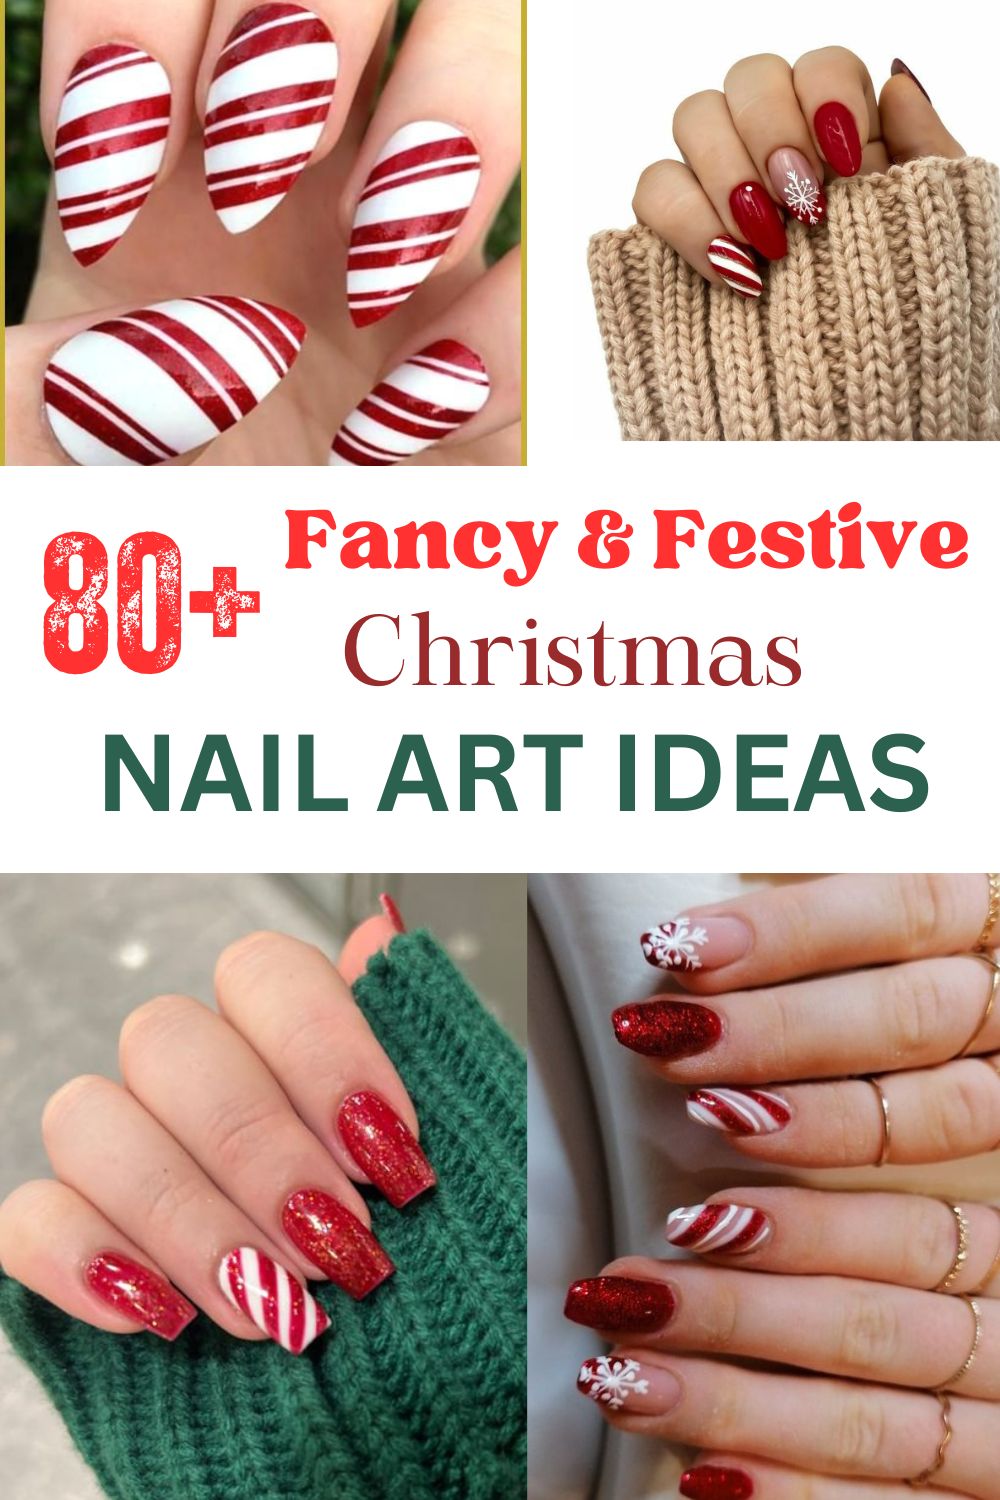 Spread That Christmas Spirit With This Cute Nail Art - HELLO! India